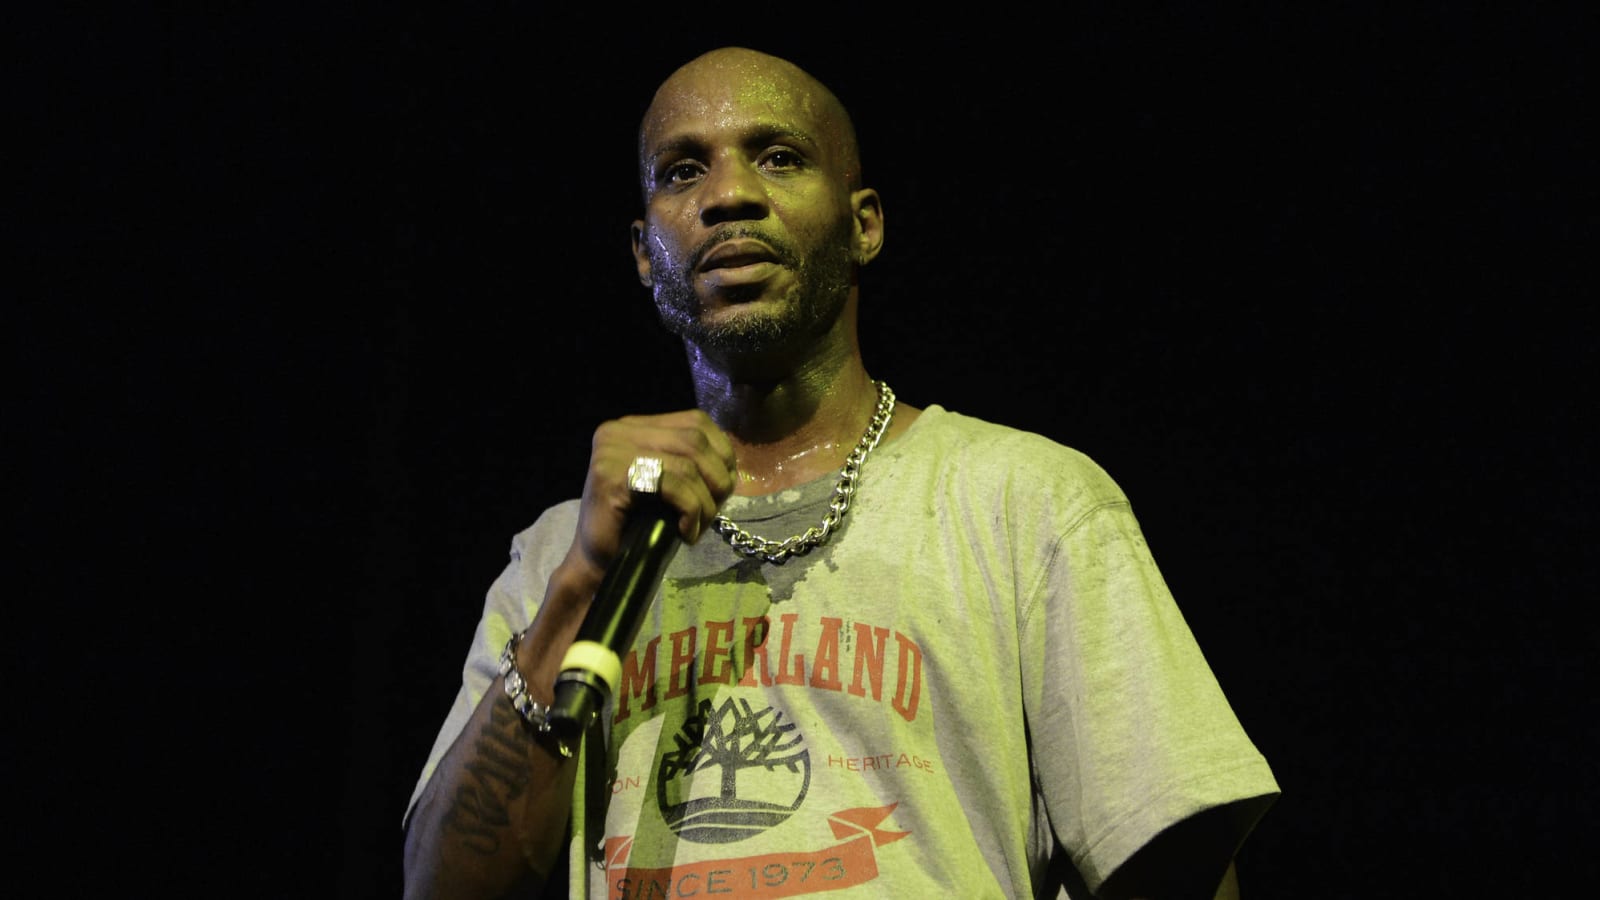 Remembering DMX: 5 of the rapper's most iconic songs